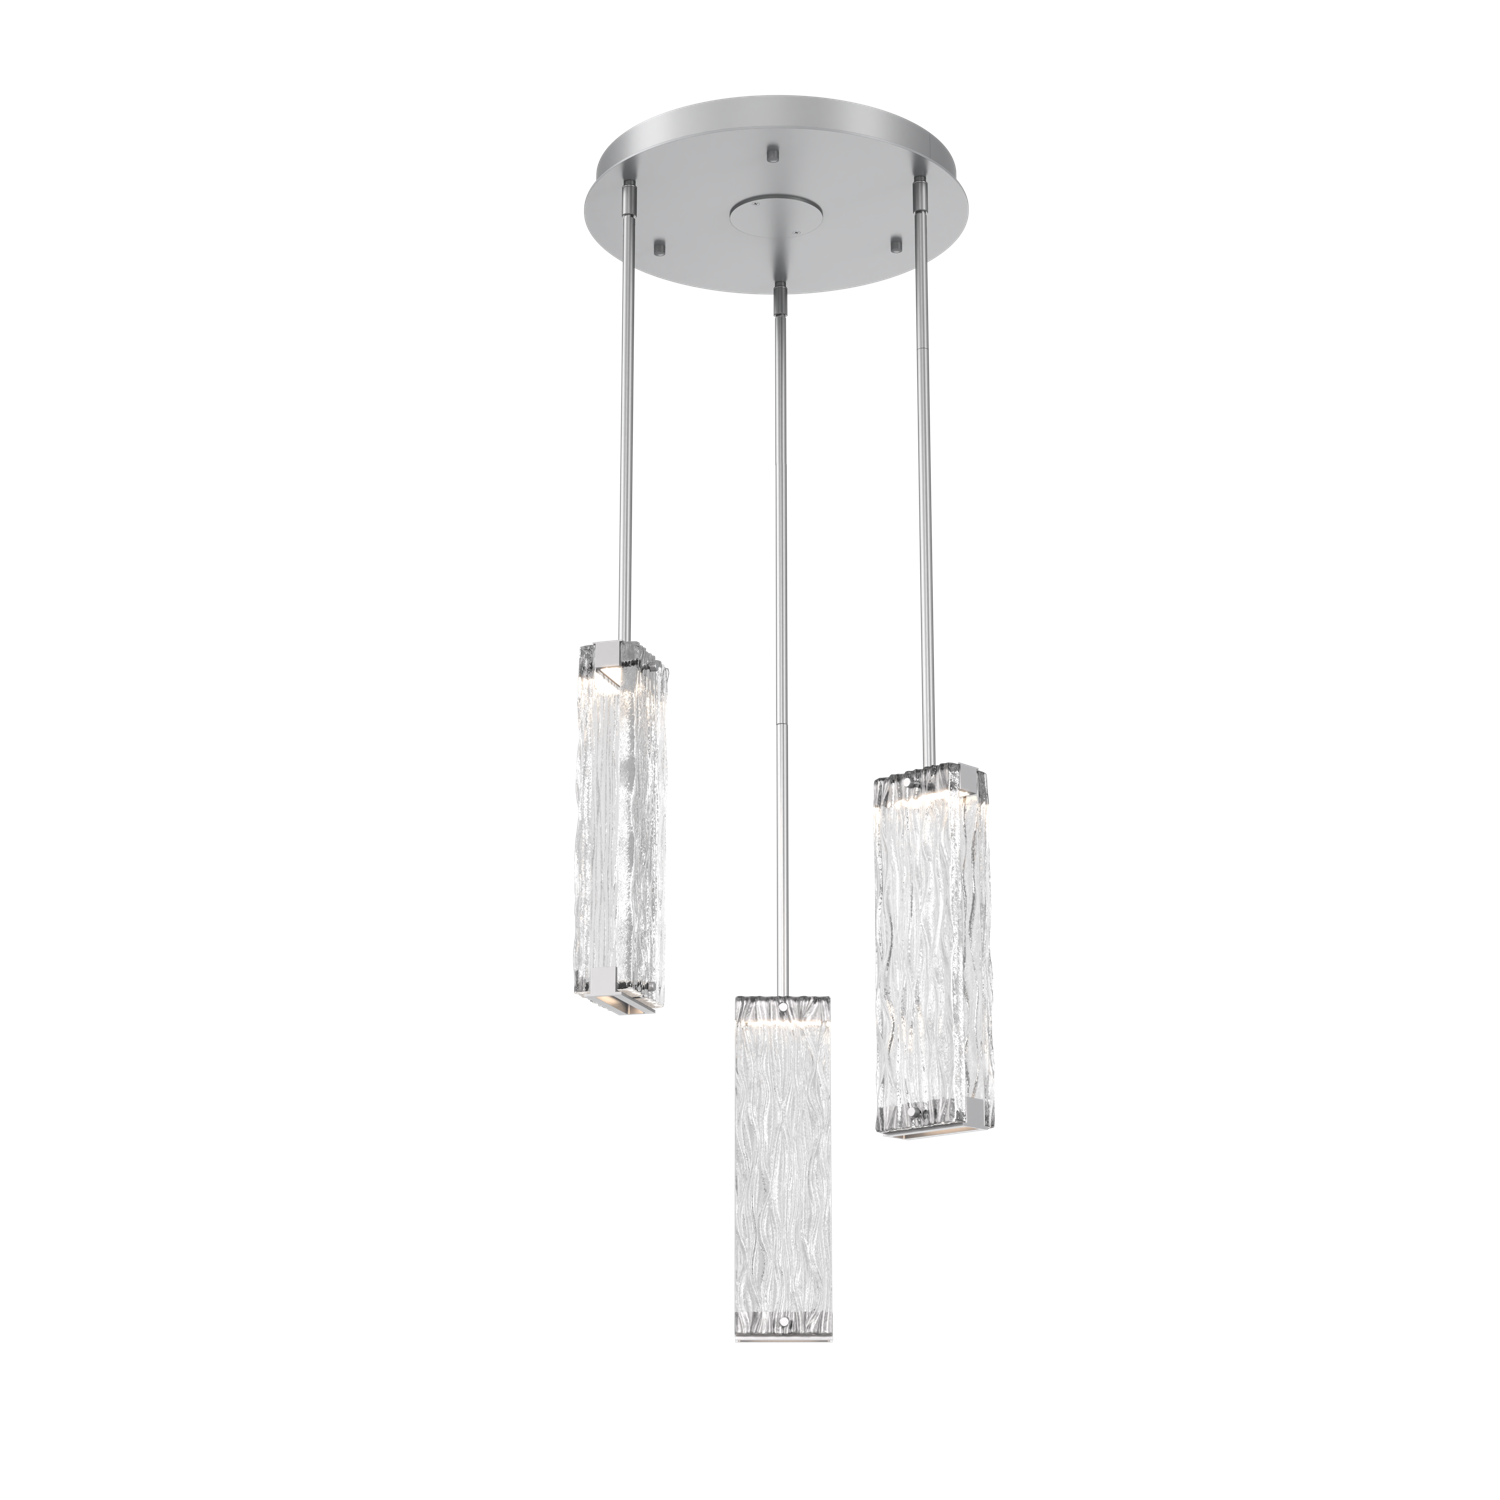 CHB0090-03-CS-TT-Hammerton-Studio-Tabulo-3-light-multi-pendant-chandelier-with-classic-silver-finish-and-clear-tidal-cast-glass-shade-and-LED-lamping